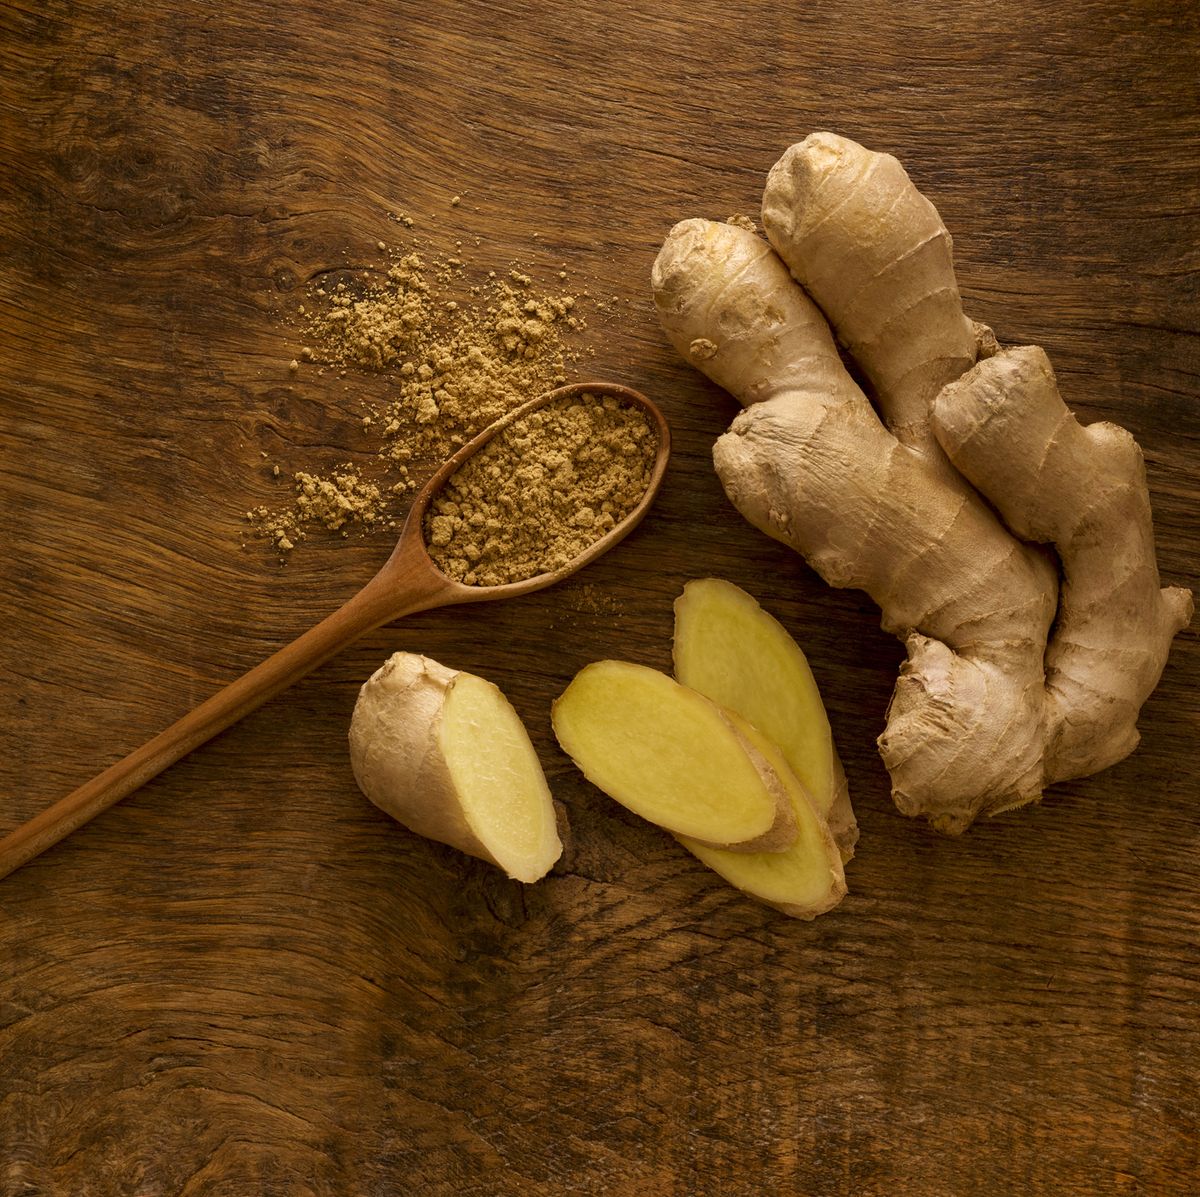 12 health benefits of ginger, approved by experts